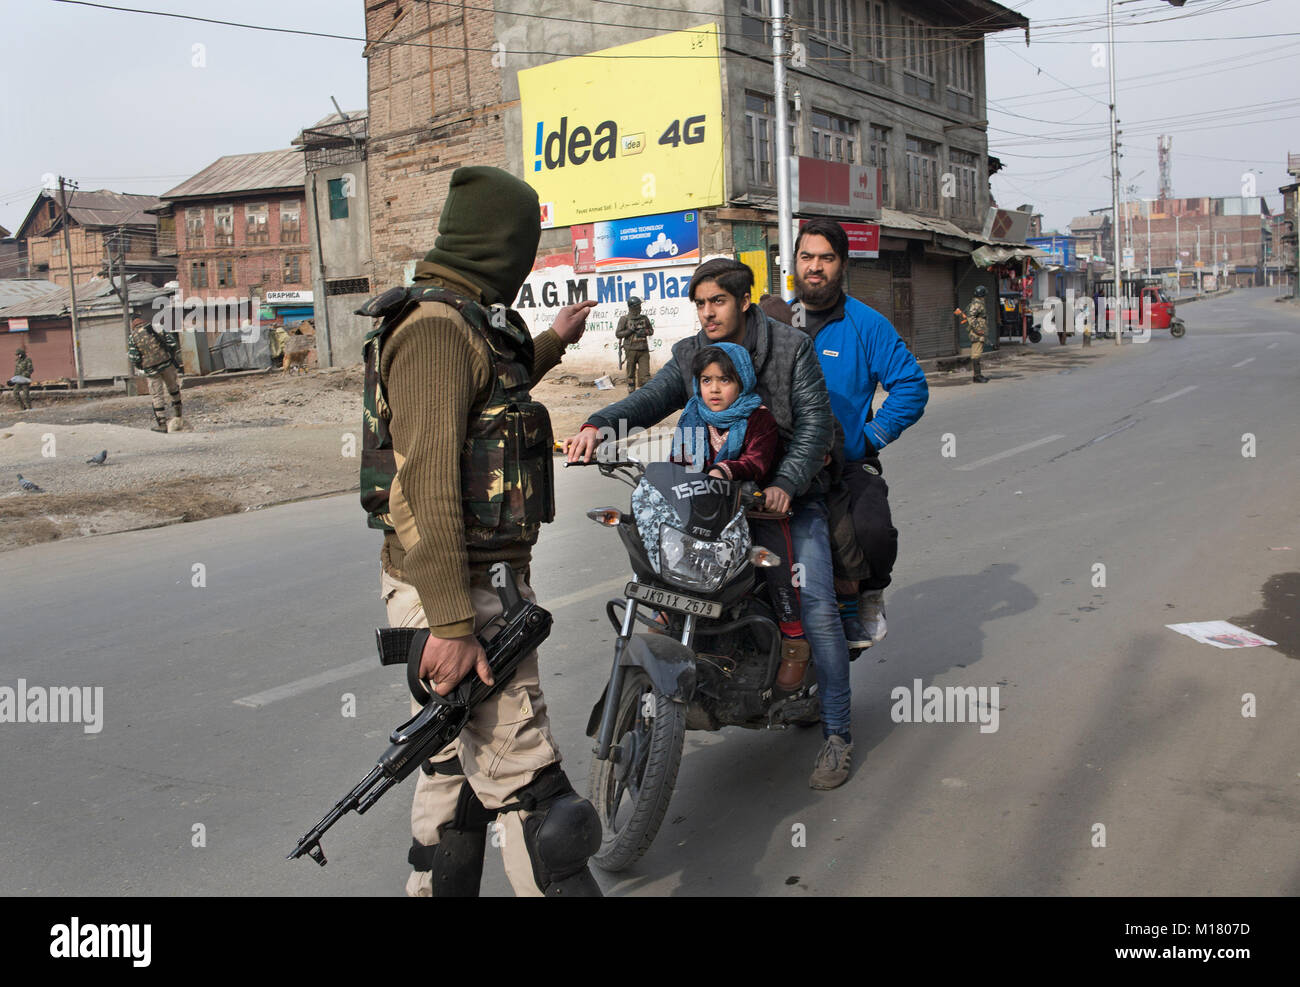 Srinagar, Indian-controlled Kashmir. 28th Jan, 2018. An Indian paramilitary trooper stops a motorcyclist during restrictions to prevent protests against civilian killings, in Srinagar city, the summer capital of Indian-controlled Kashmir, Jan. 28, 2018. At least two civilians were killed and one wounded Saturday after Indian troops fired upon protesters in restive Indian-controlled Kashmir, police said. Credit: Javed Dar/Xinhua/Alamy Live News Stock Photo